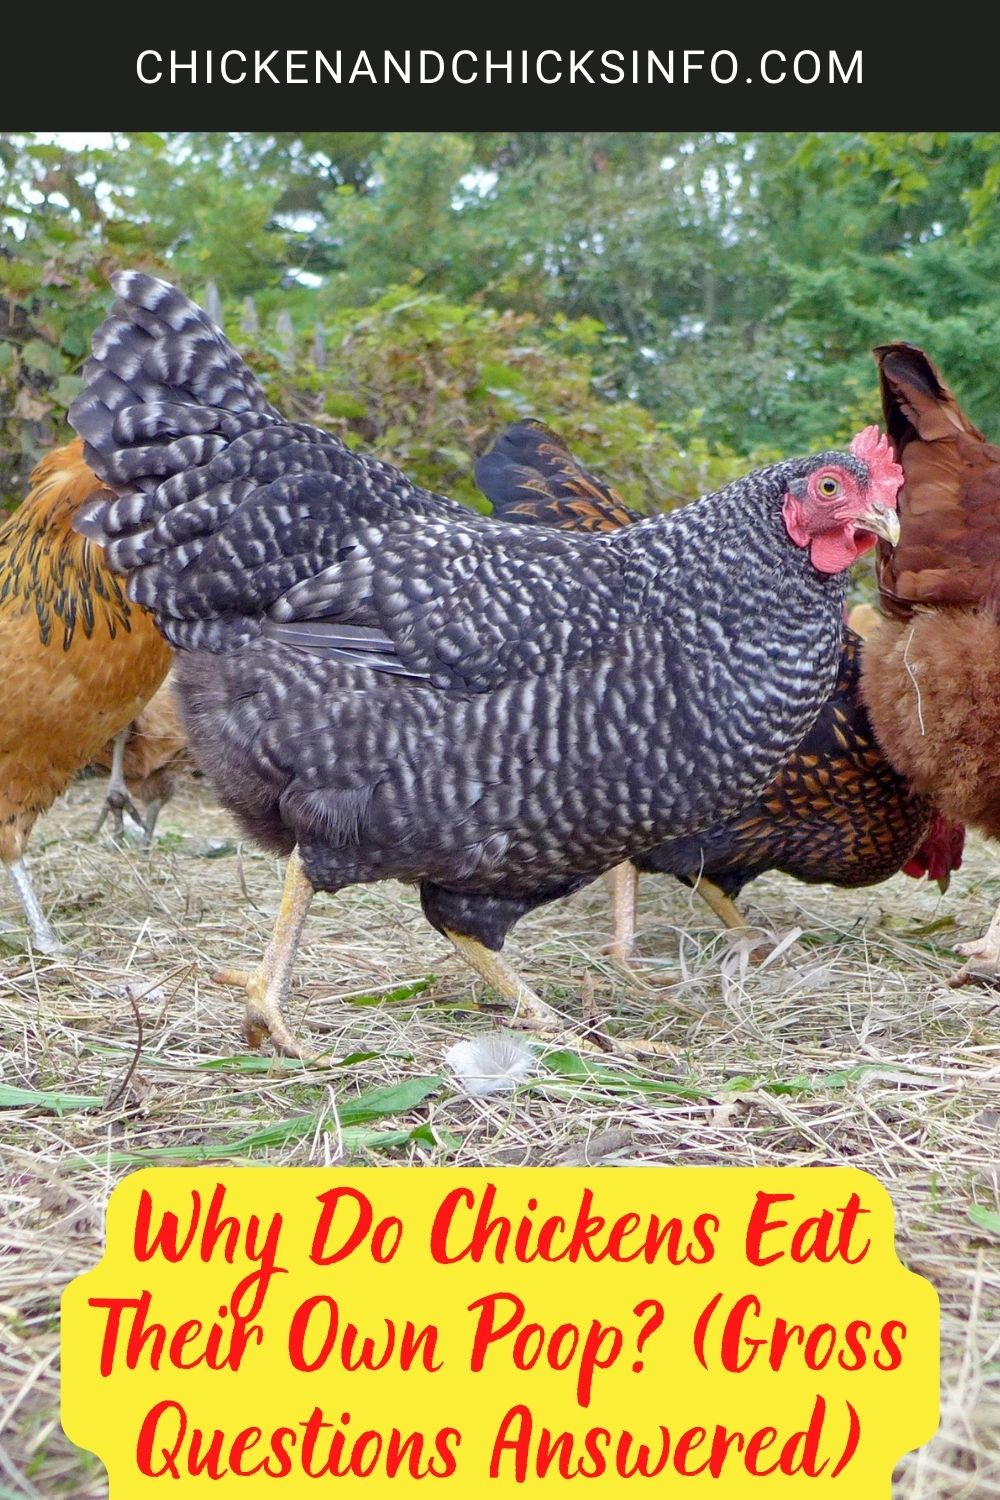 Why Do Chickens Eat Their Own Poop? (Gross Questions Answered) poster.
